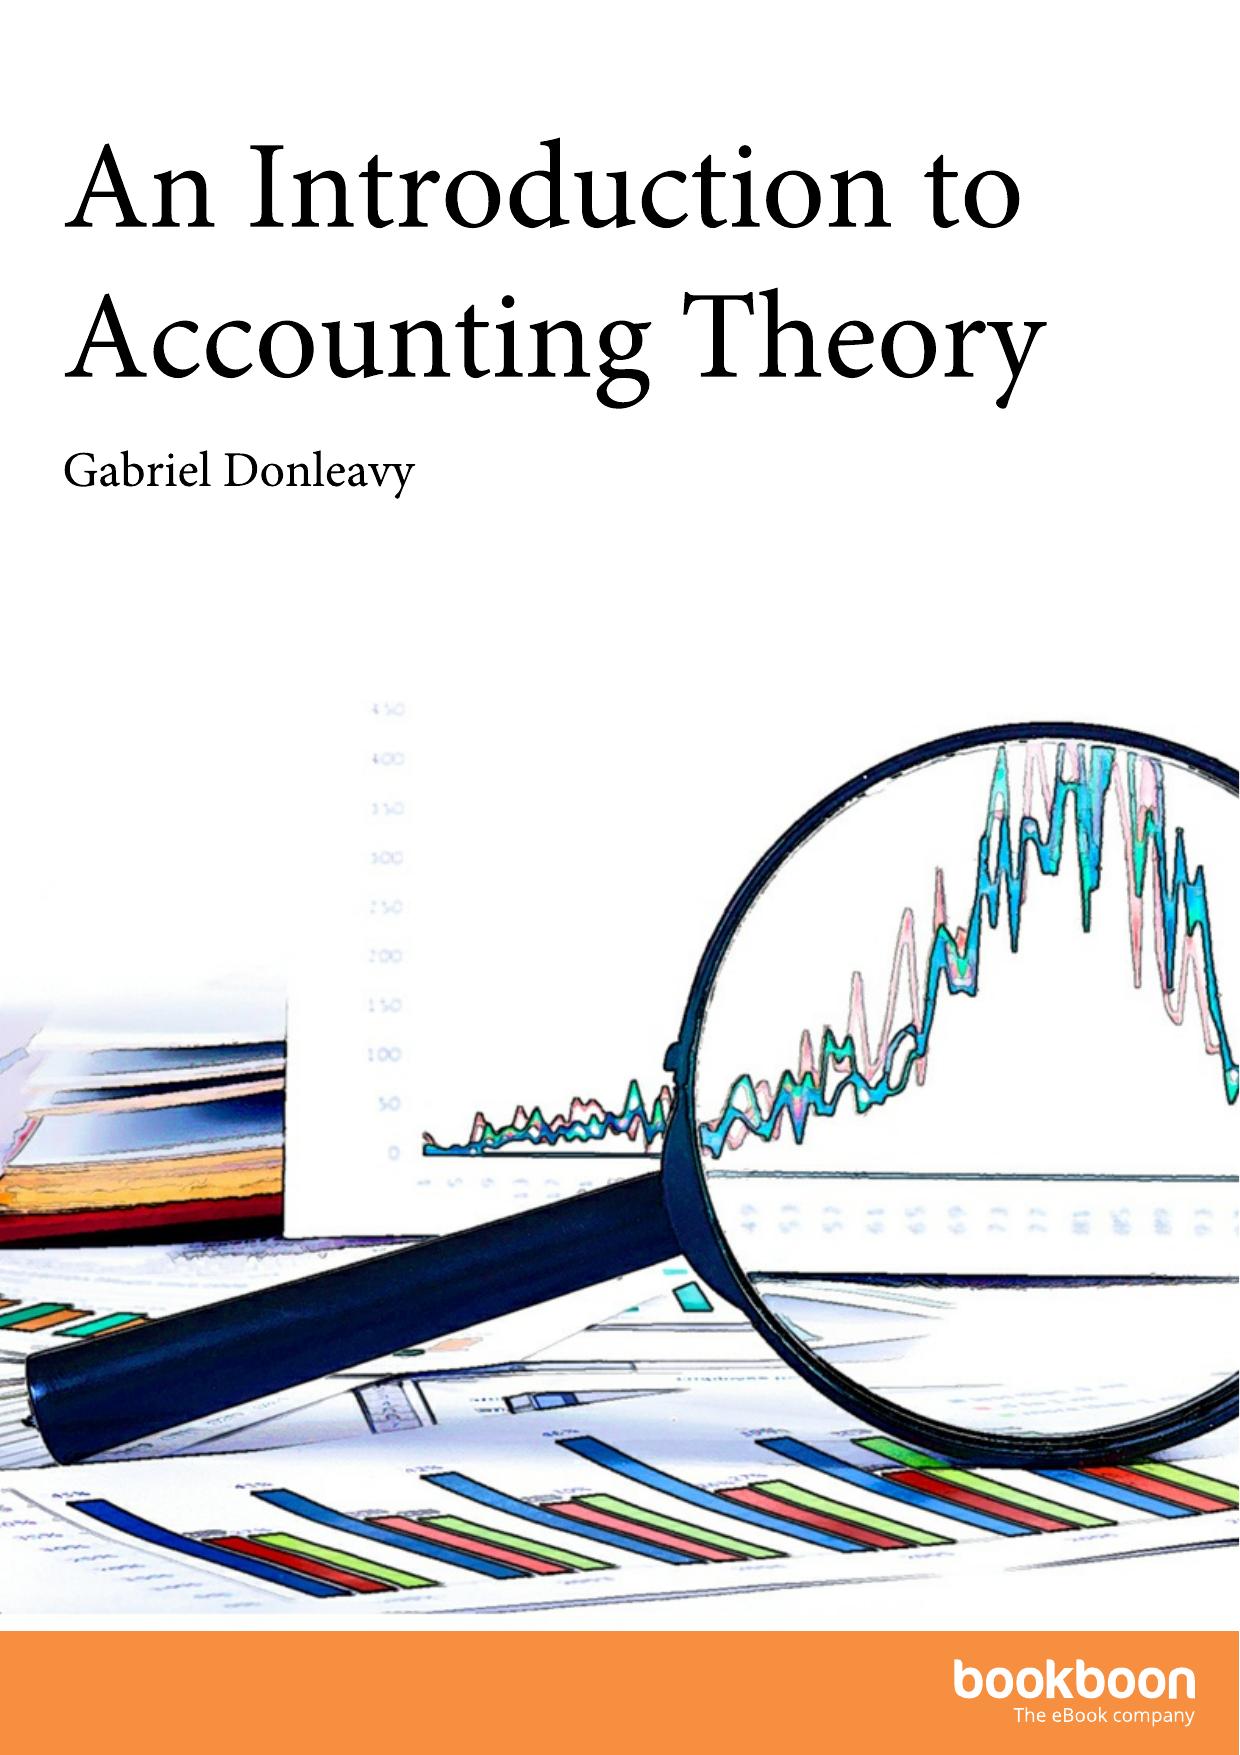 An Introduction to Accounting Theory